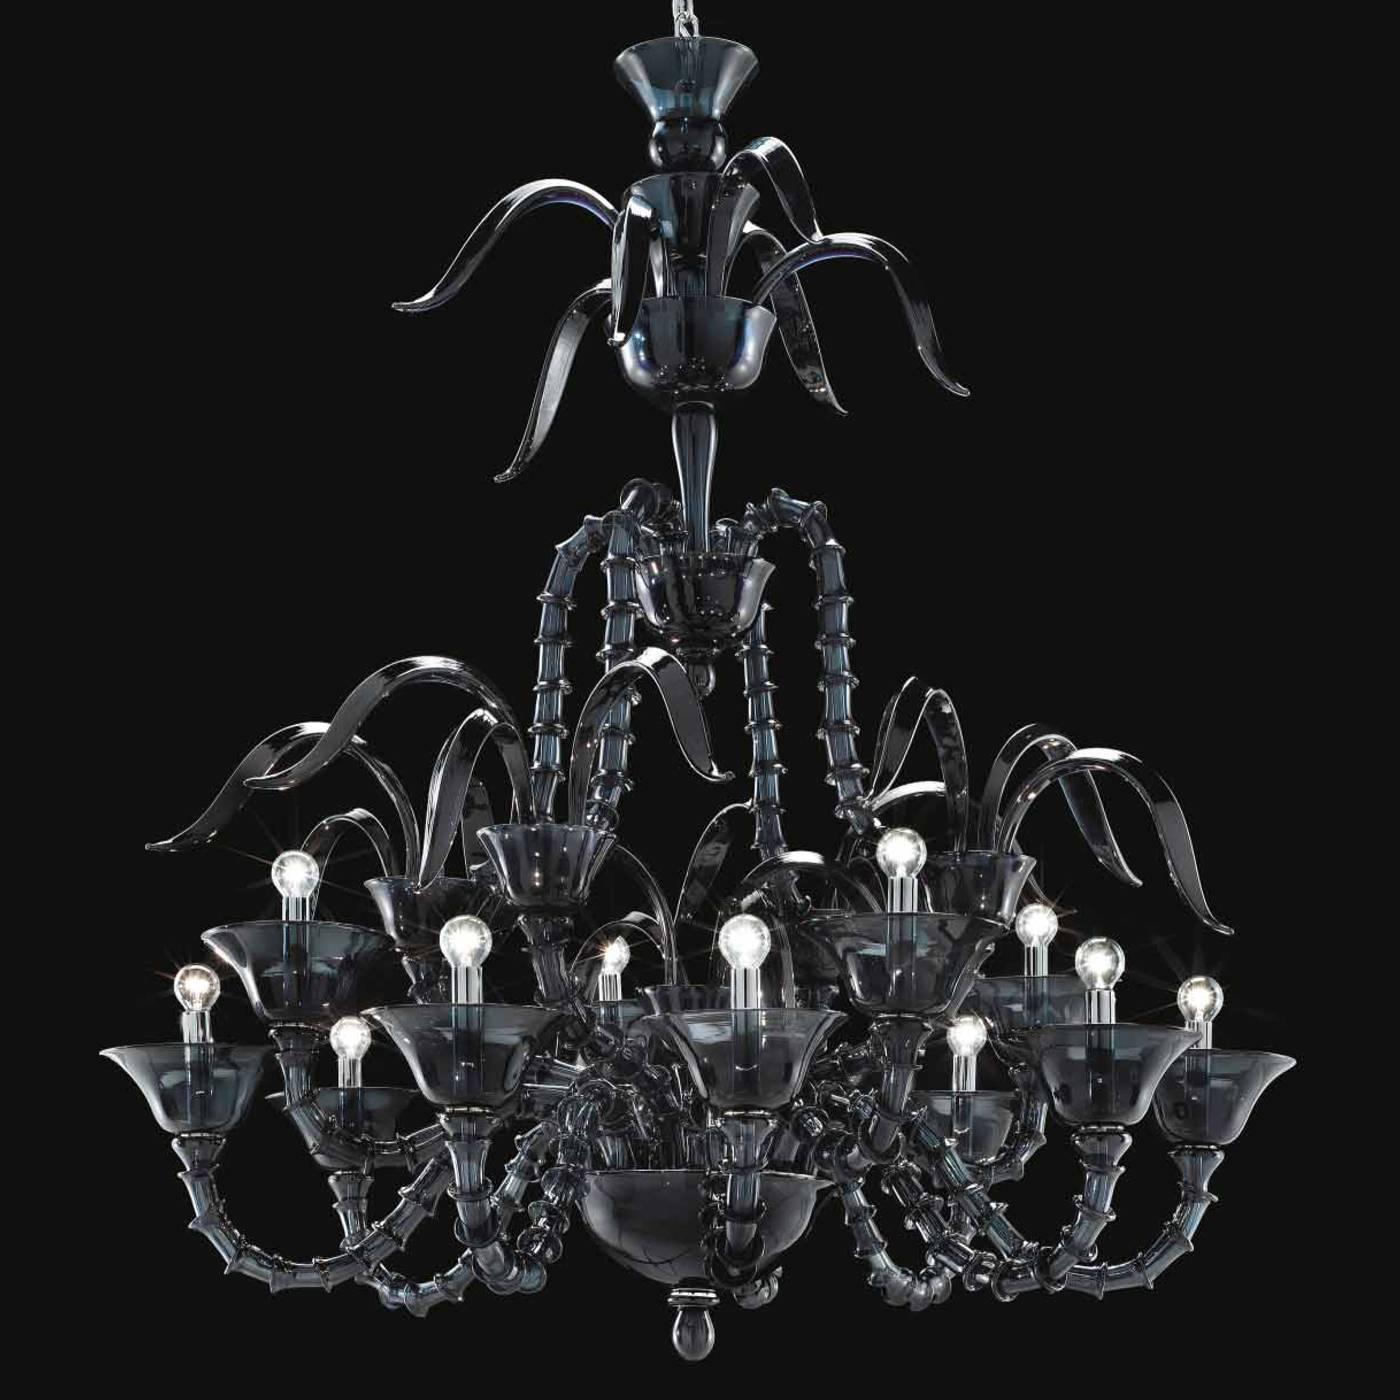 This twelve-light chandelier is entirely mouth-blown in Murano glass in the 'Rezzonico' style, which originated in the 18th century in Venice. The jointed arms and Cascade of the top decorations are in striking black, giving this Classic piece a